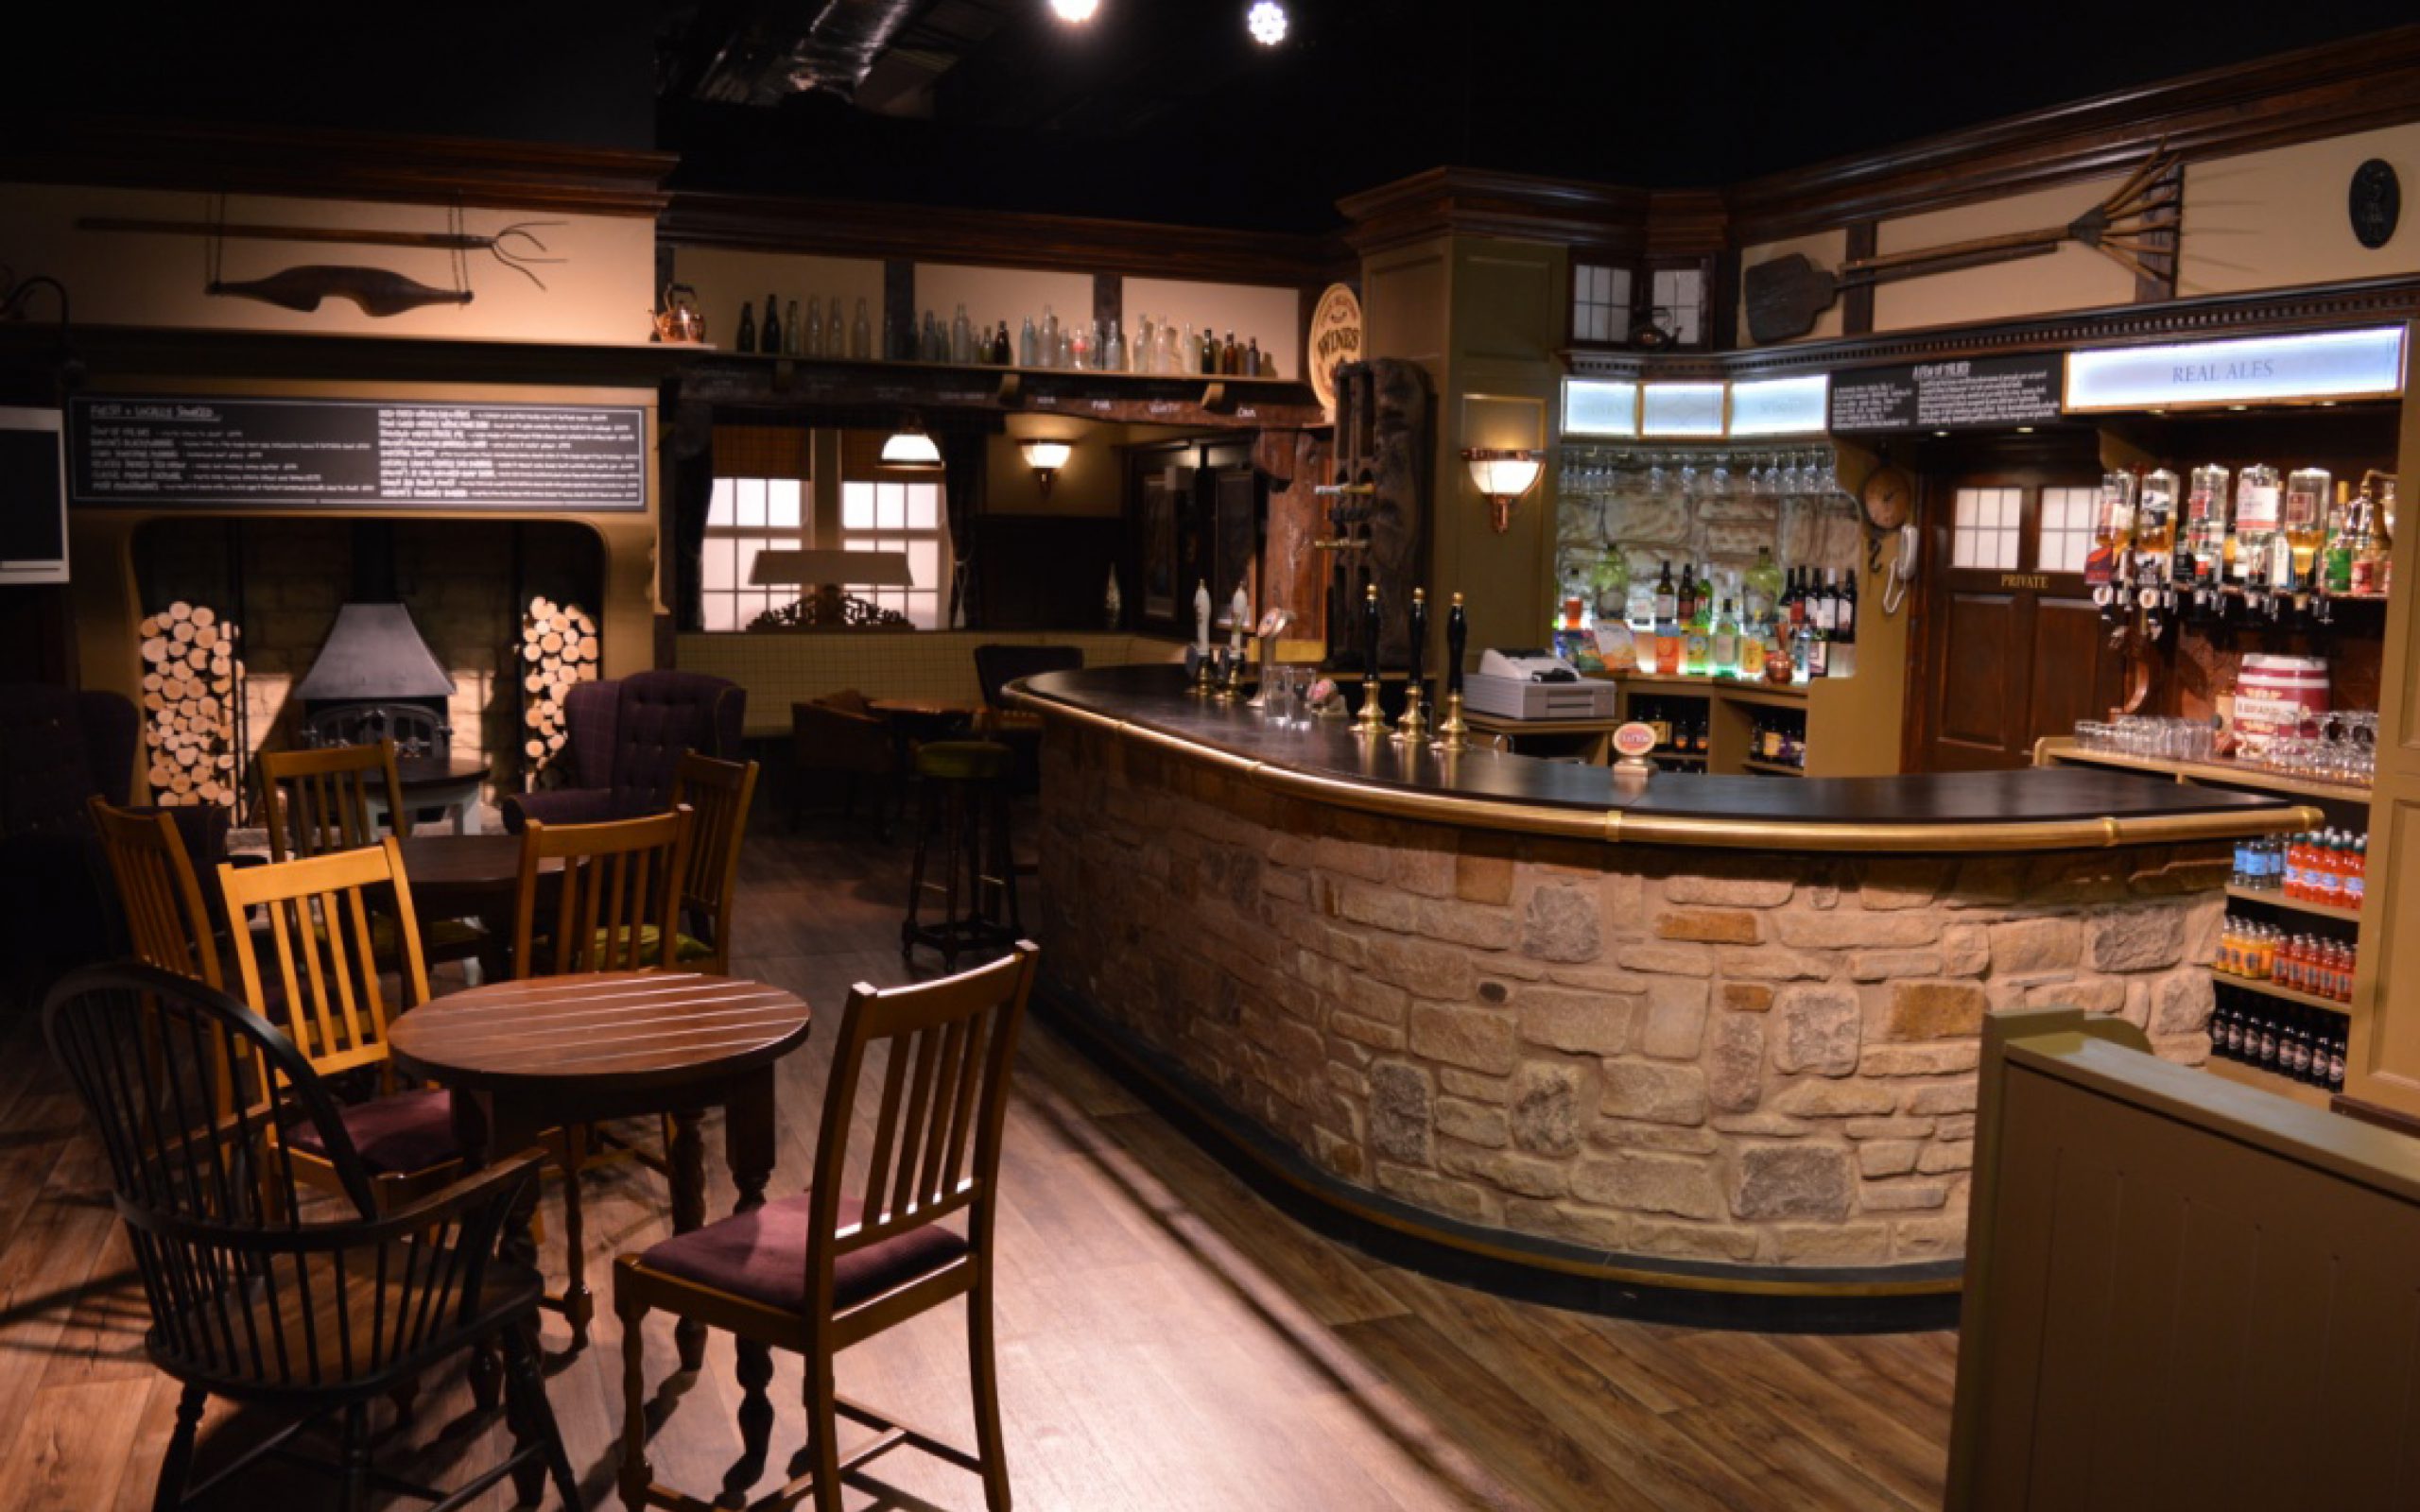 Bar themed area in a set